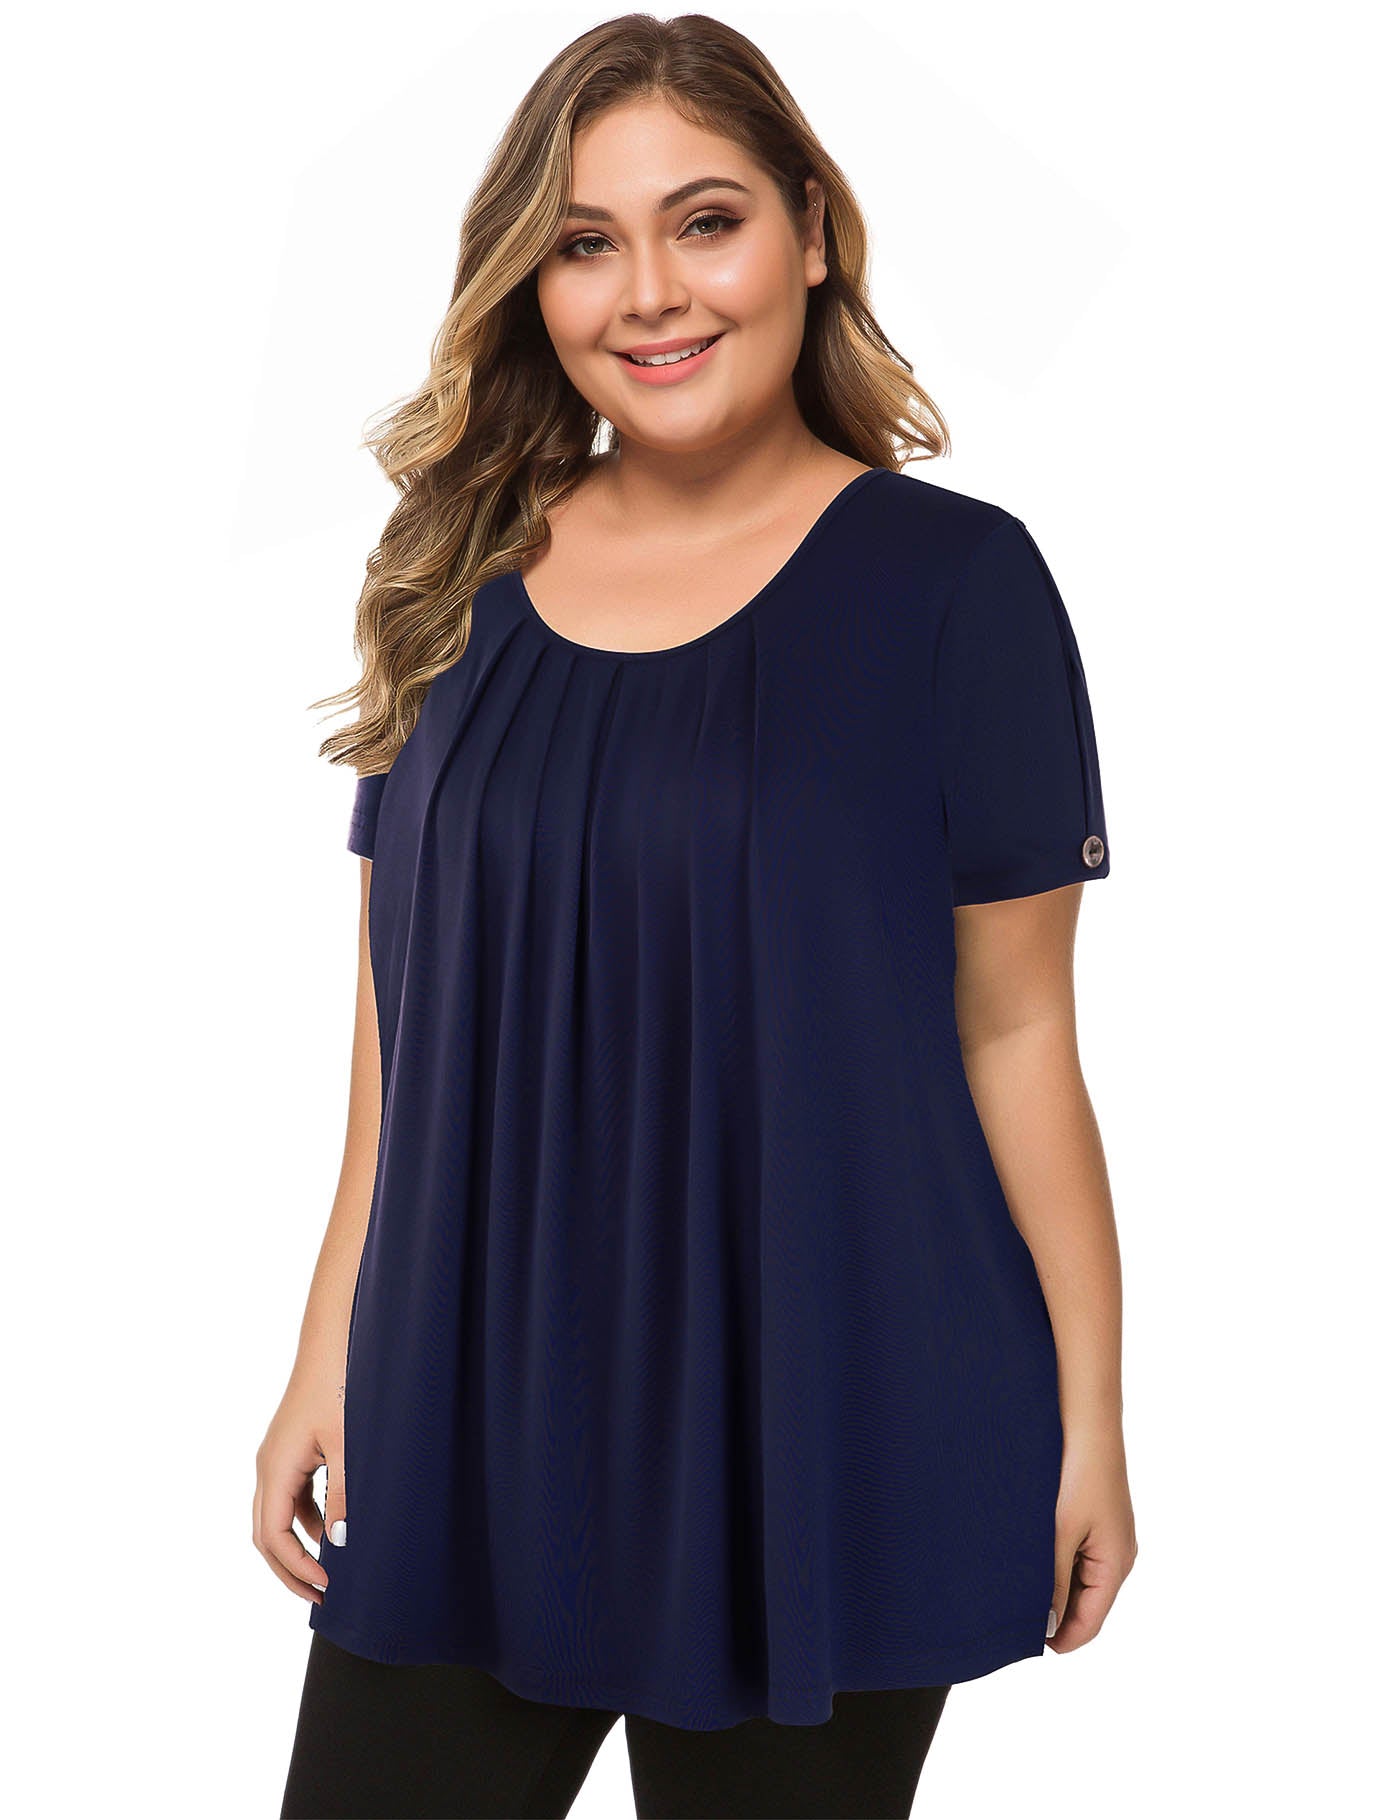  Women Casual Tops Big and Tall Plus Size Hide Belly Shirts  Short Sleeve Tunic Tops Blouse Flowy A-Blue : Clothing, Shoes & Jewelry